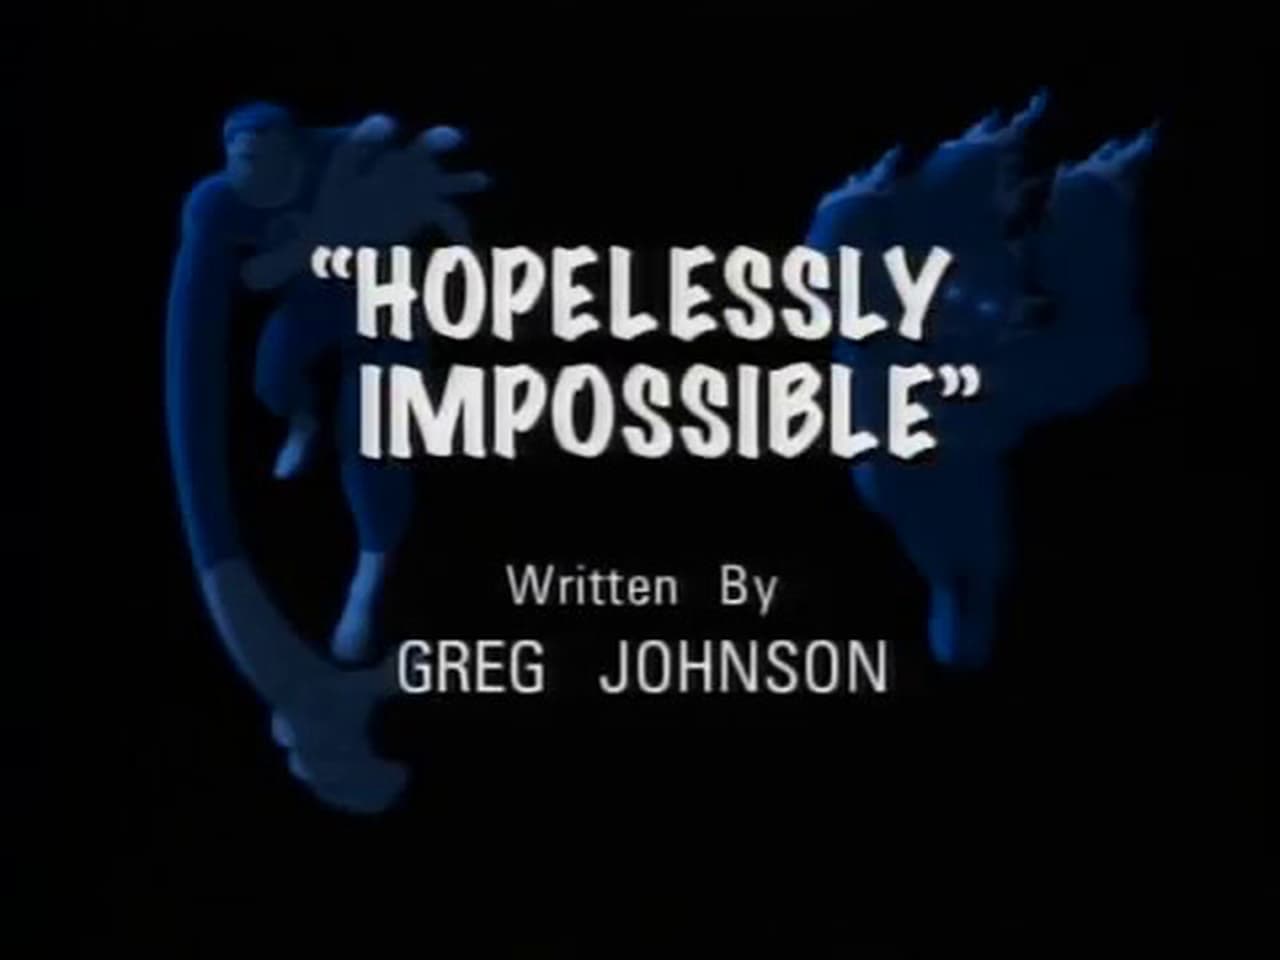 Hopelessly Impossible